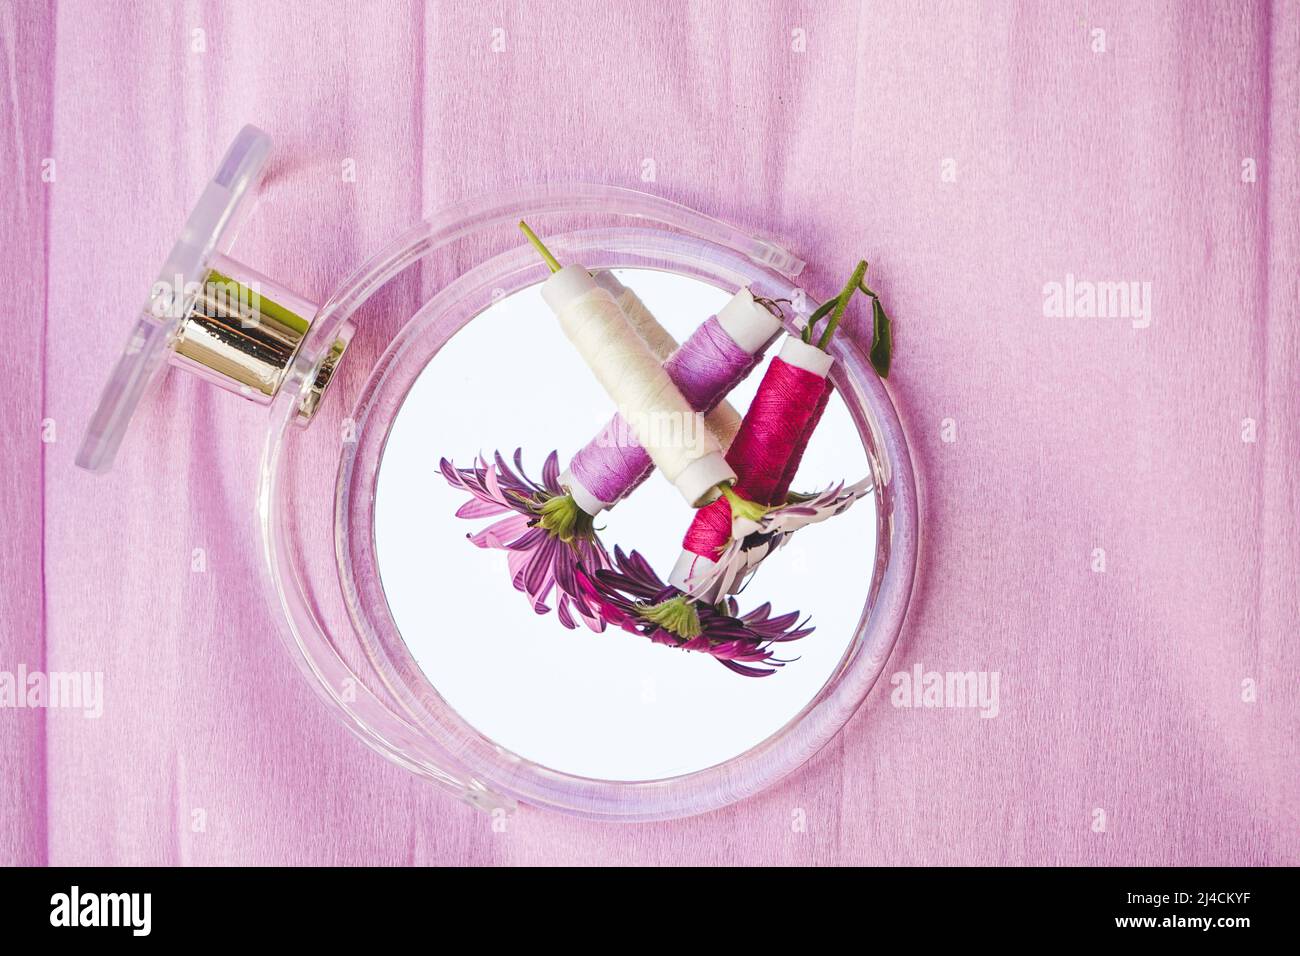 Still life of flowers, sewing threads and a beauty mirror in trendy seasonal tones Stock Photo